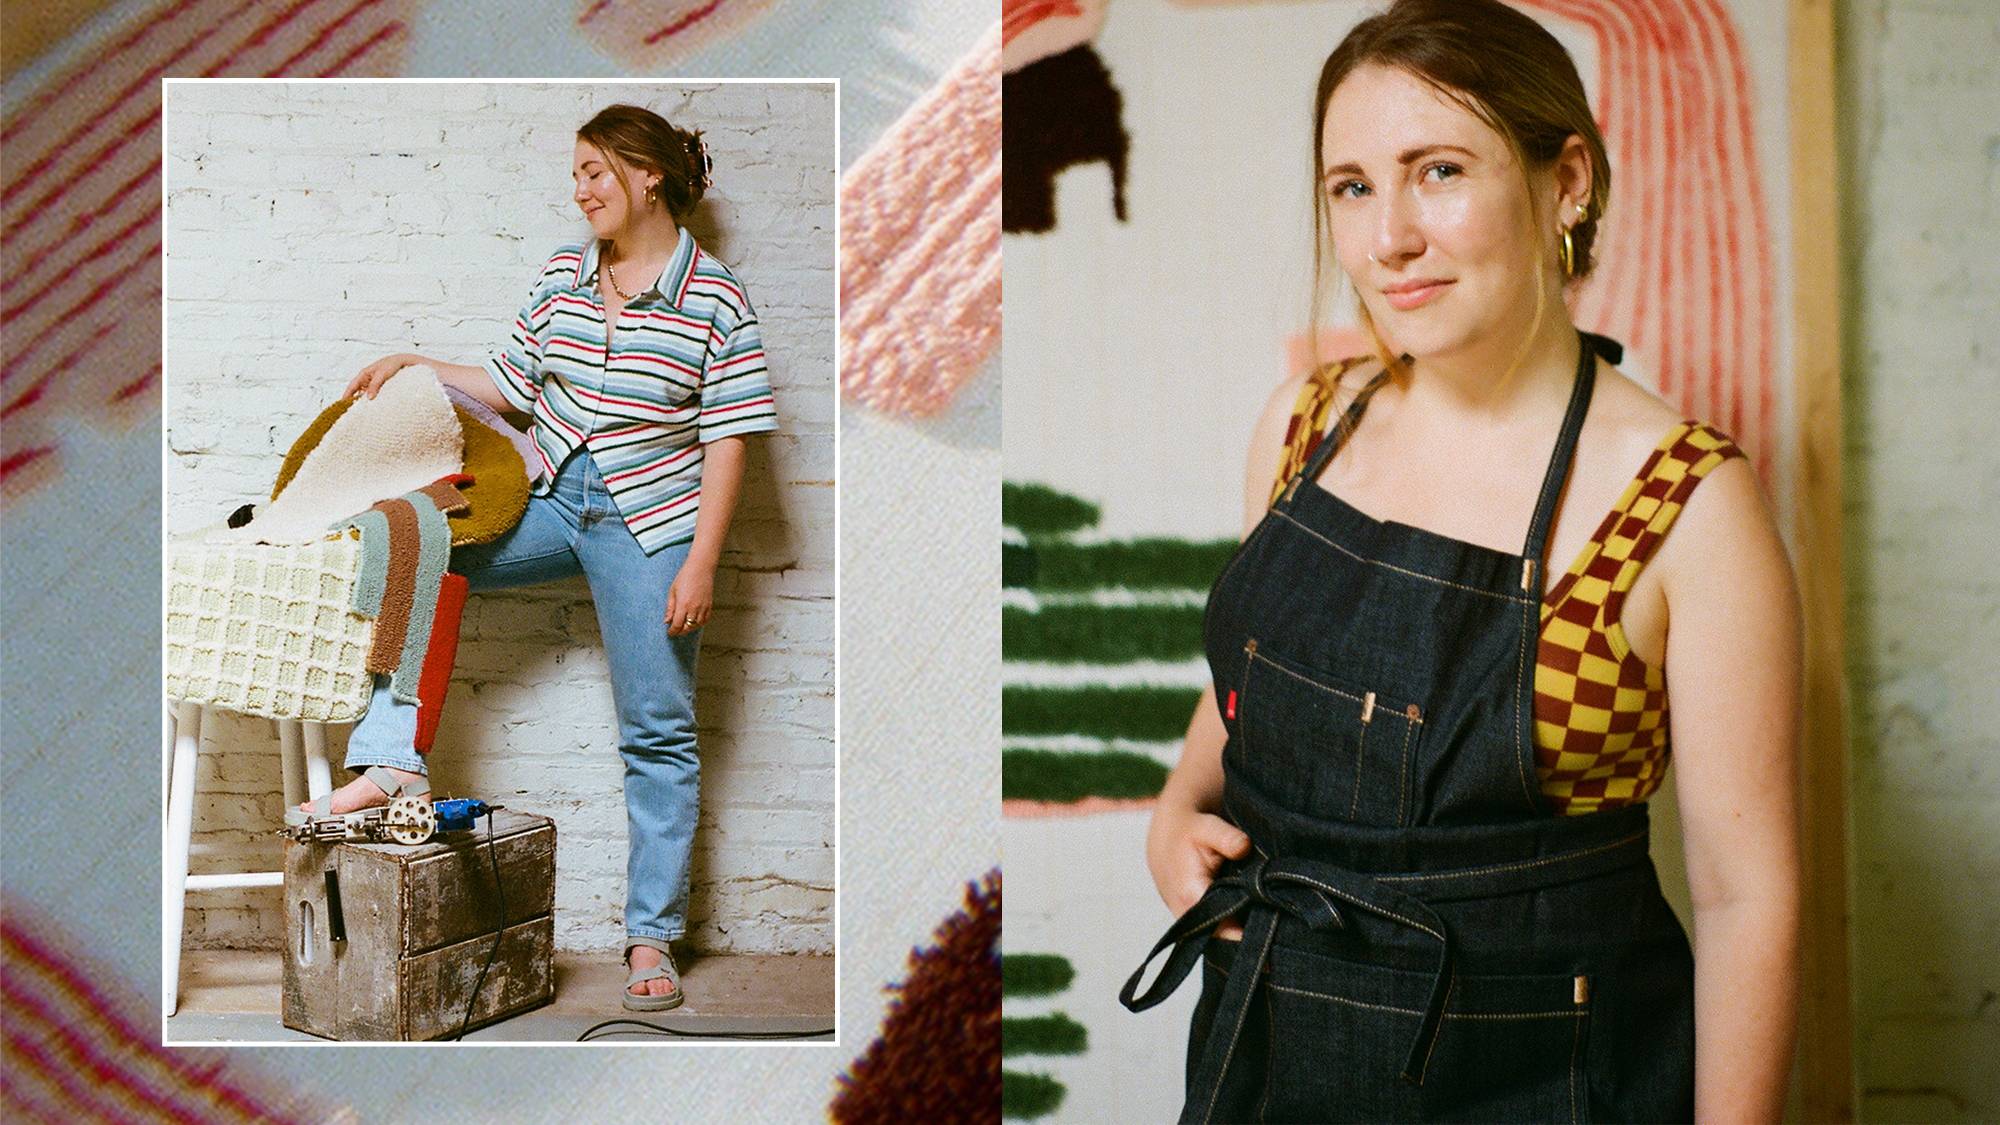 CAROLINE KAUFMAN in her levis overalls and jeans displaying her artwork